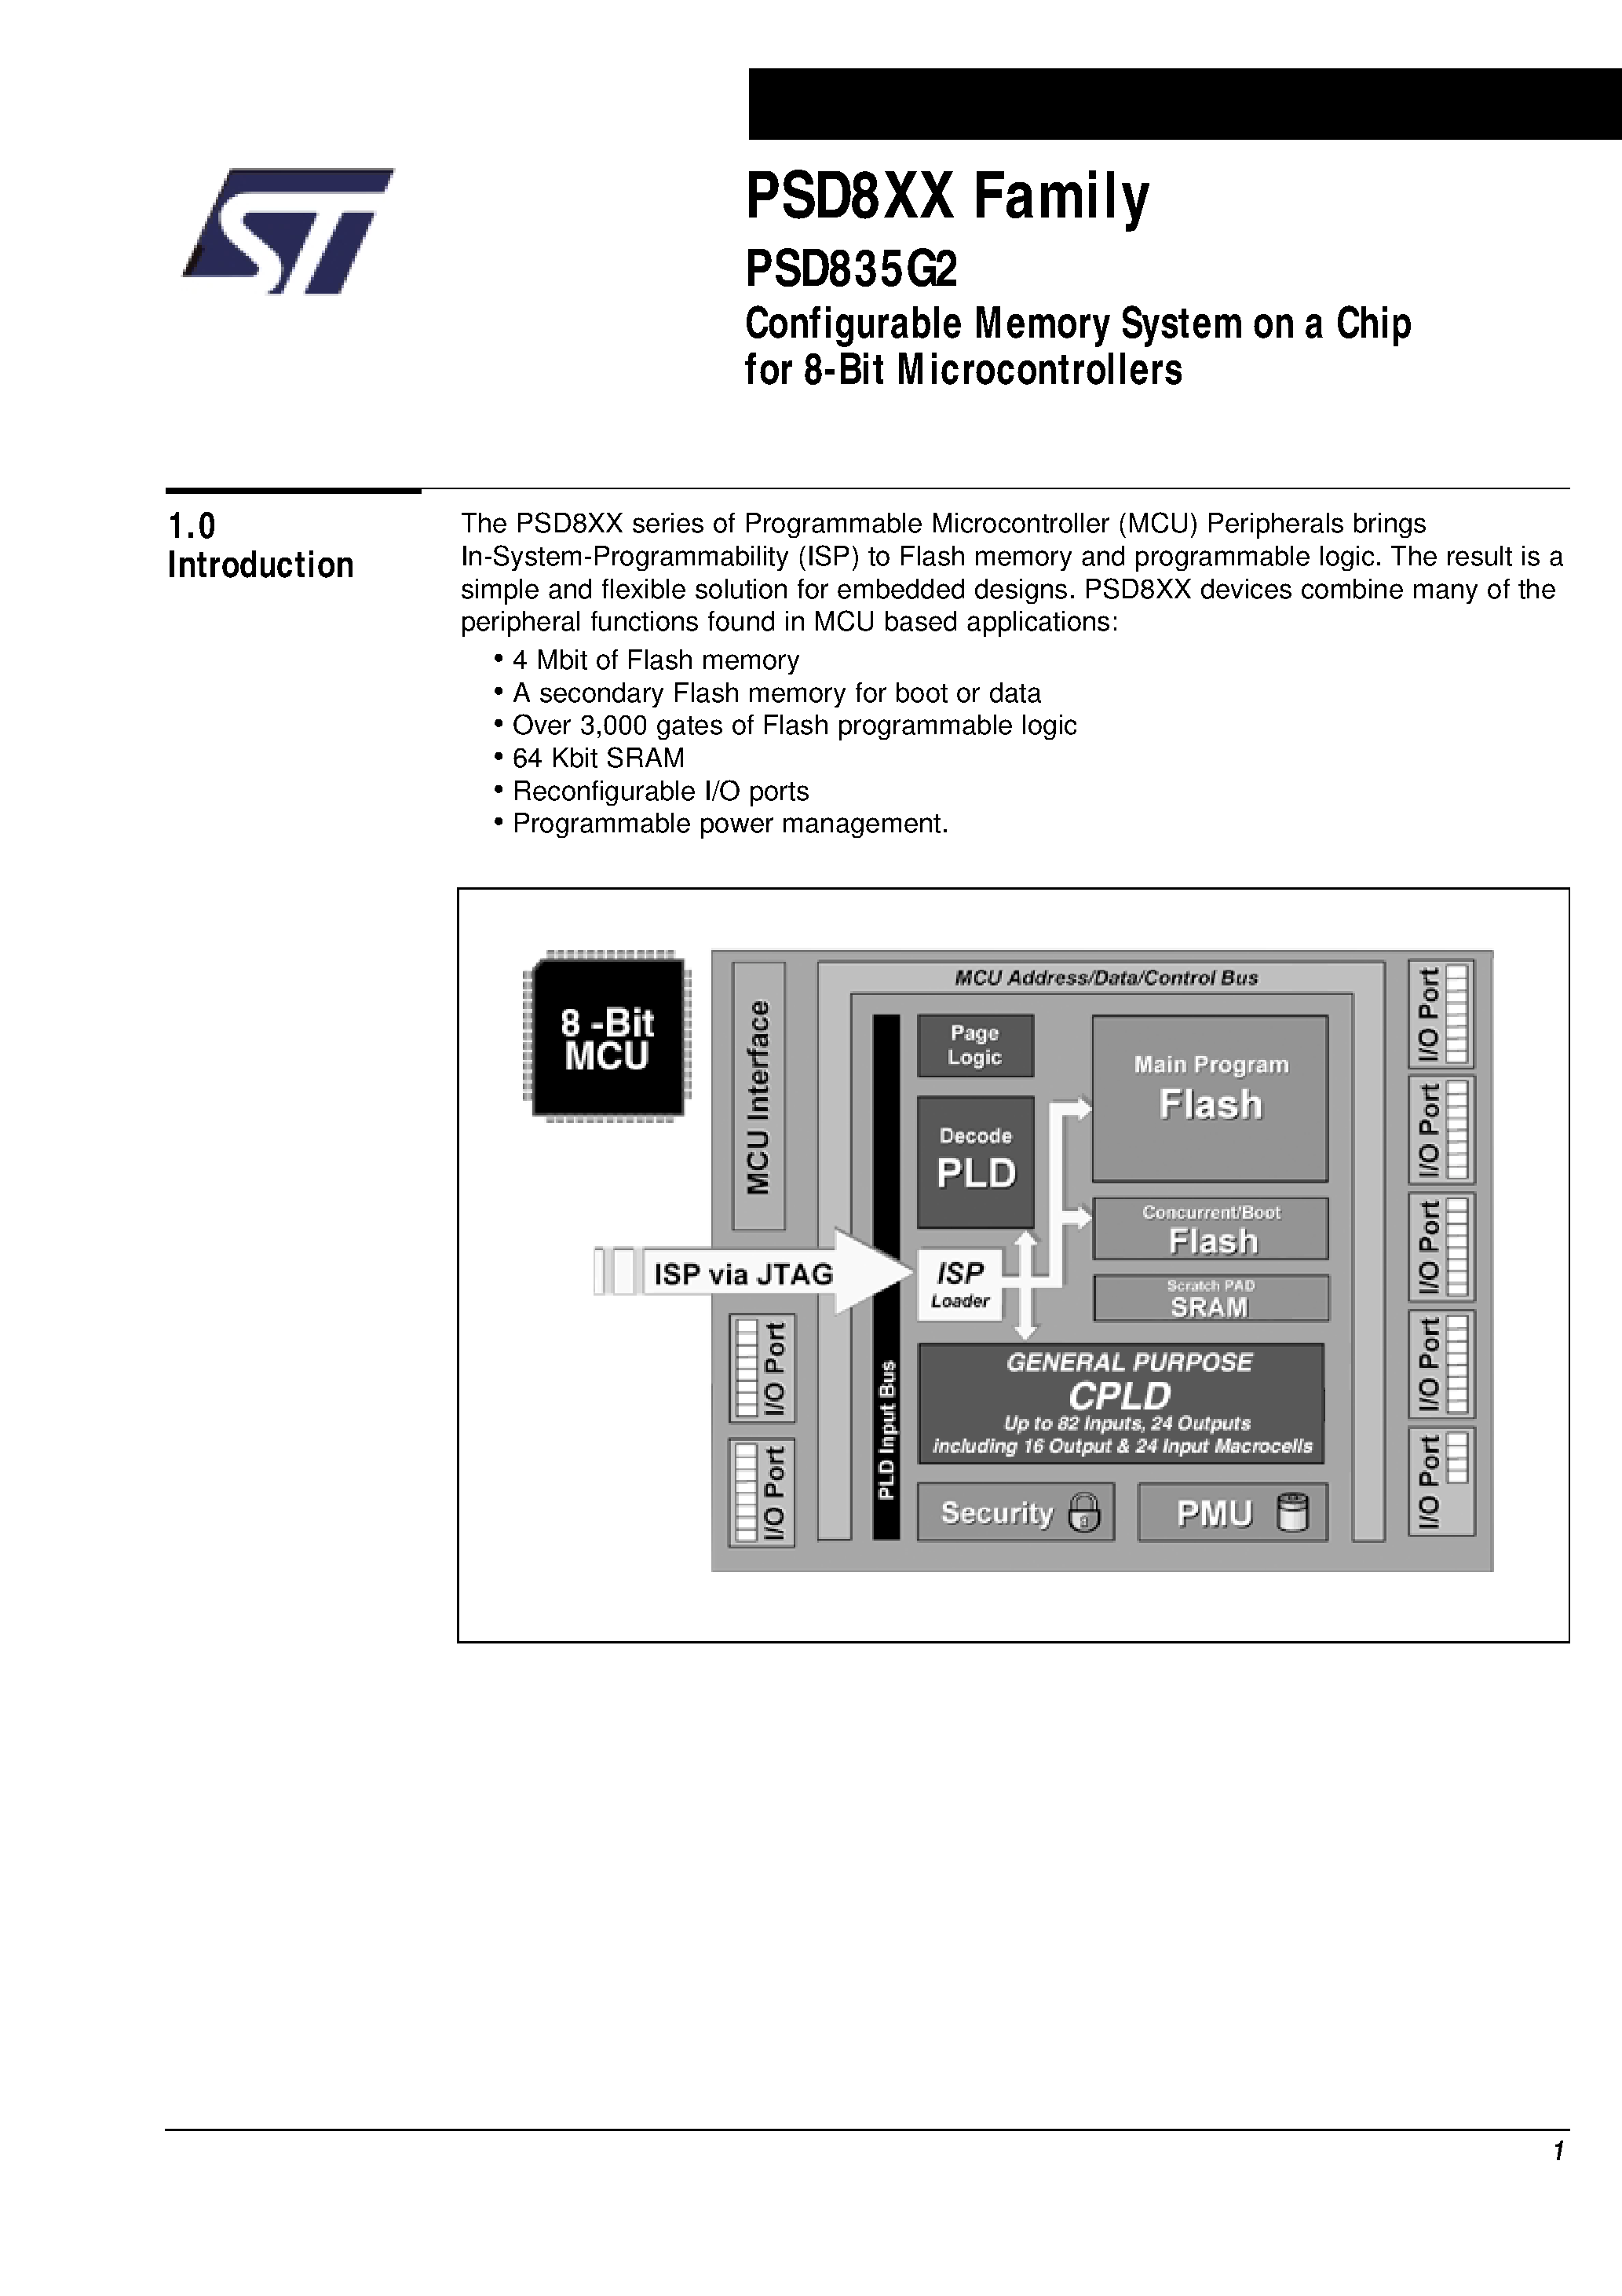 Datasheet PSD835F1V-A-15M - Configurable Memory System on a Chip for 8-Bit Microcontrollers page 2